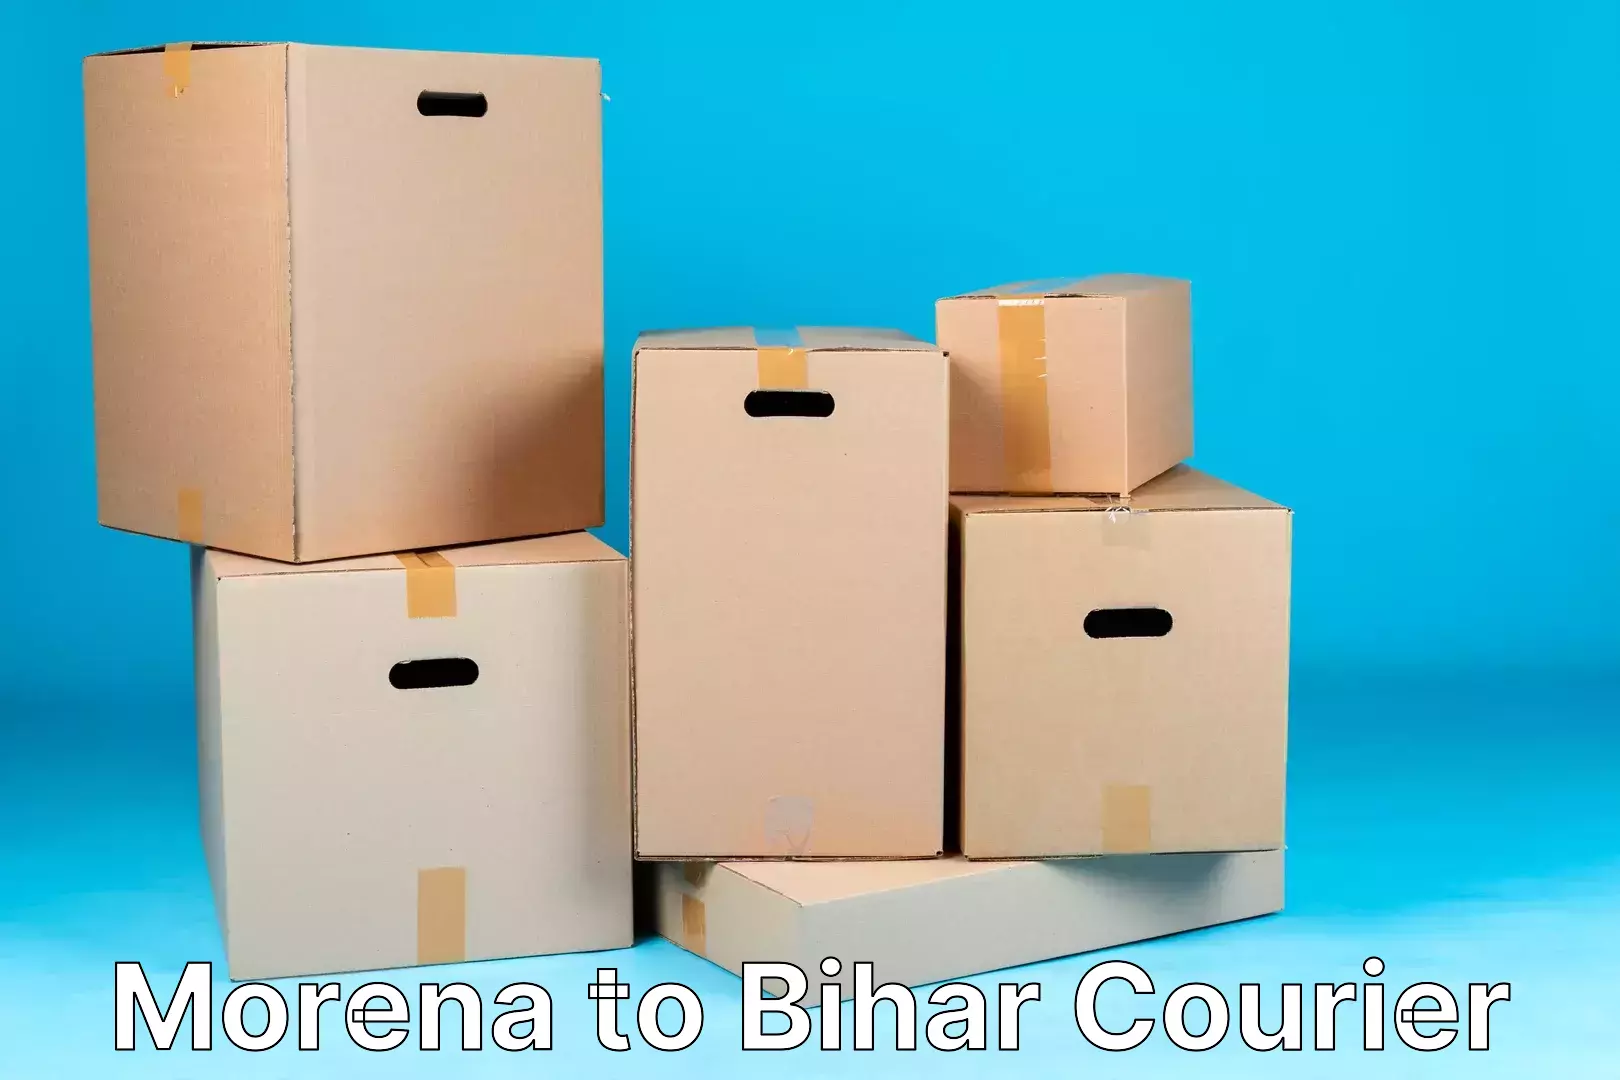 Round-the-clock parcel delivery Morena to Bihar